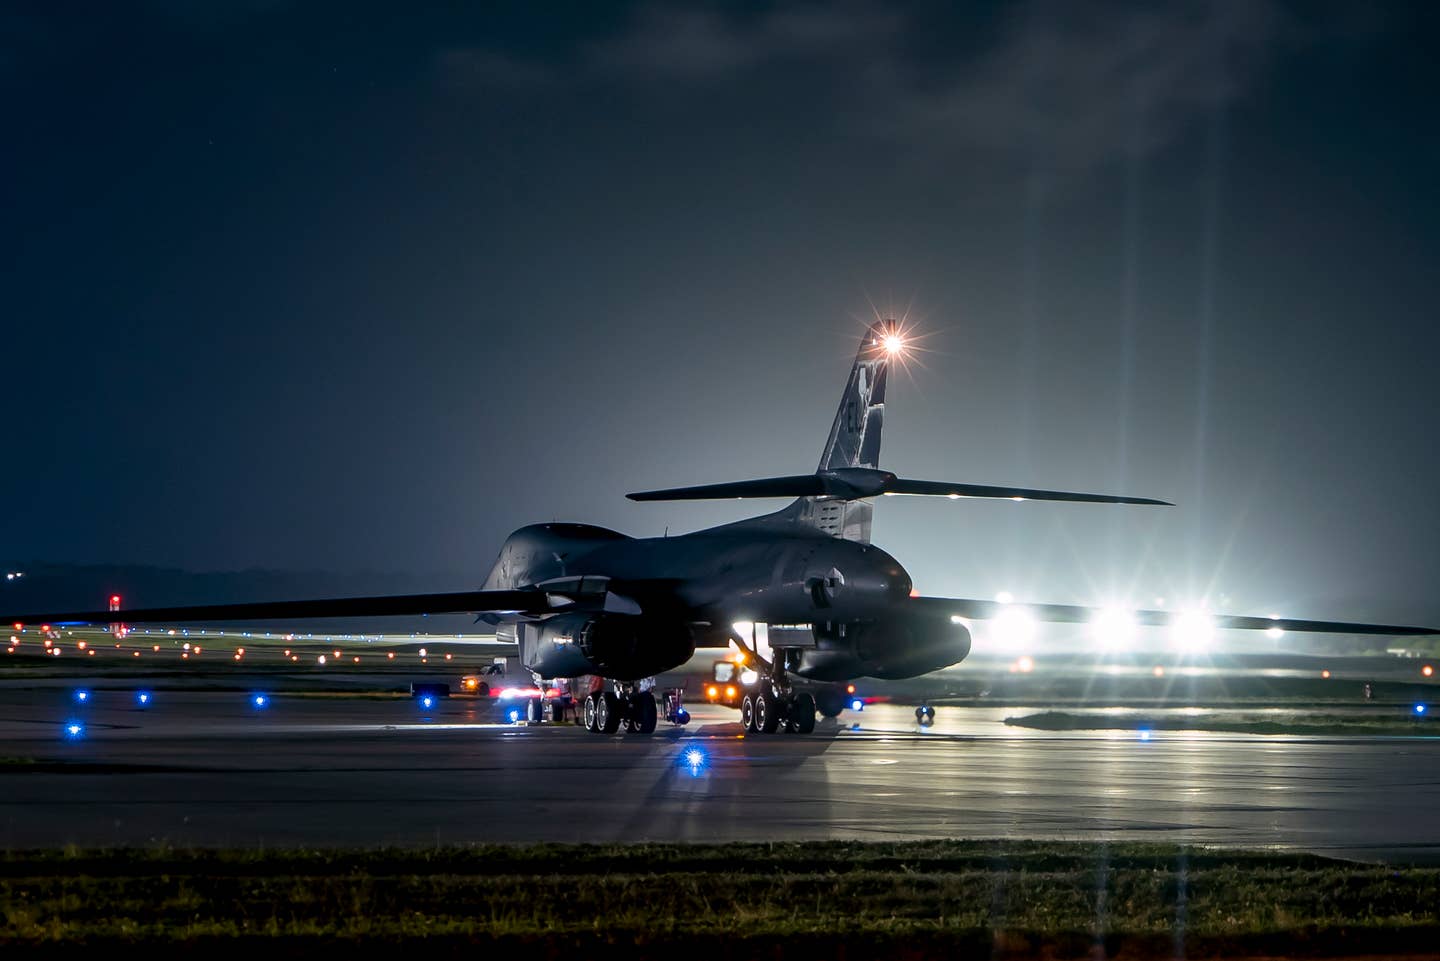 A B-1B waits on a taxiway at Andersen Air Force Base after arriving for the latest Bomber Task Force mission, June 3, 2022. <em>U.S. Air Force photo by Master Sgt. Nicholas Priest</em>